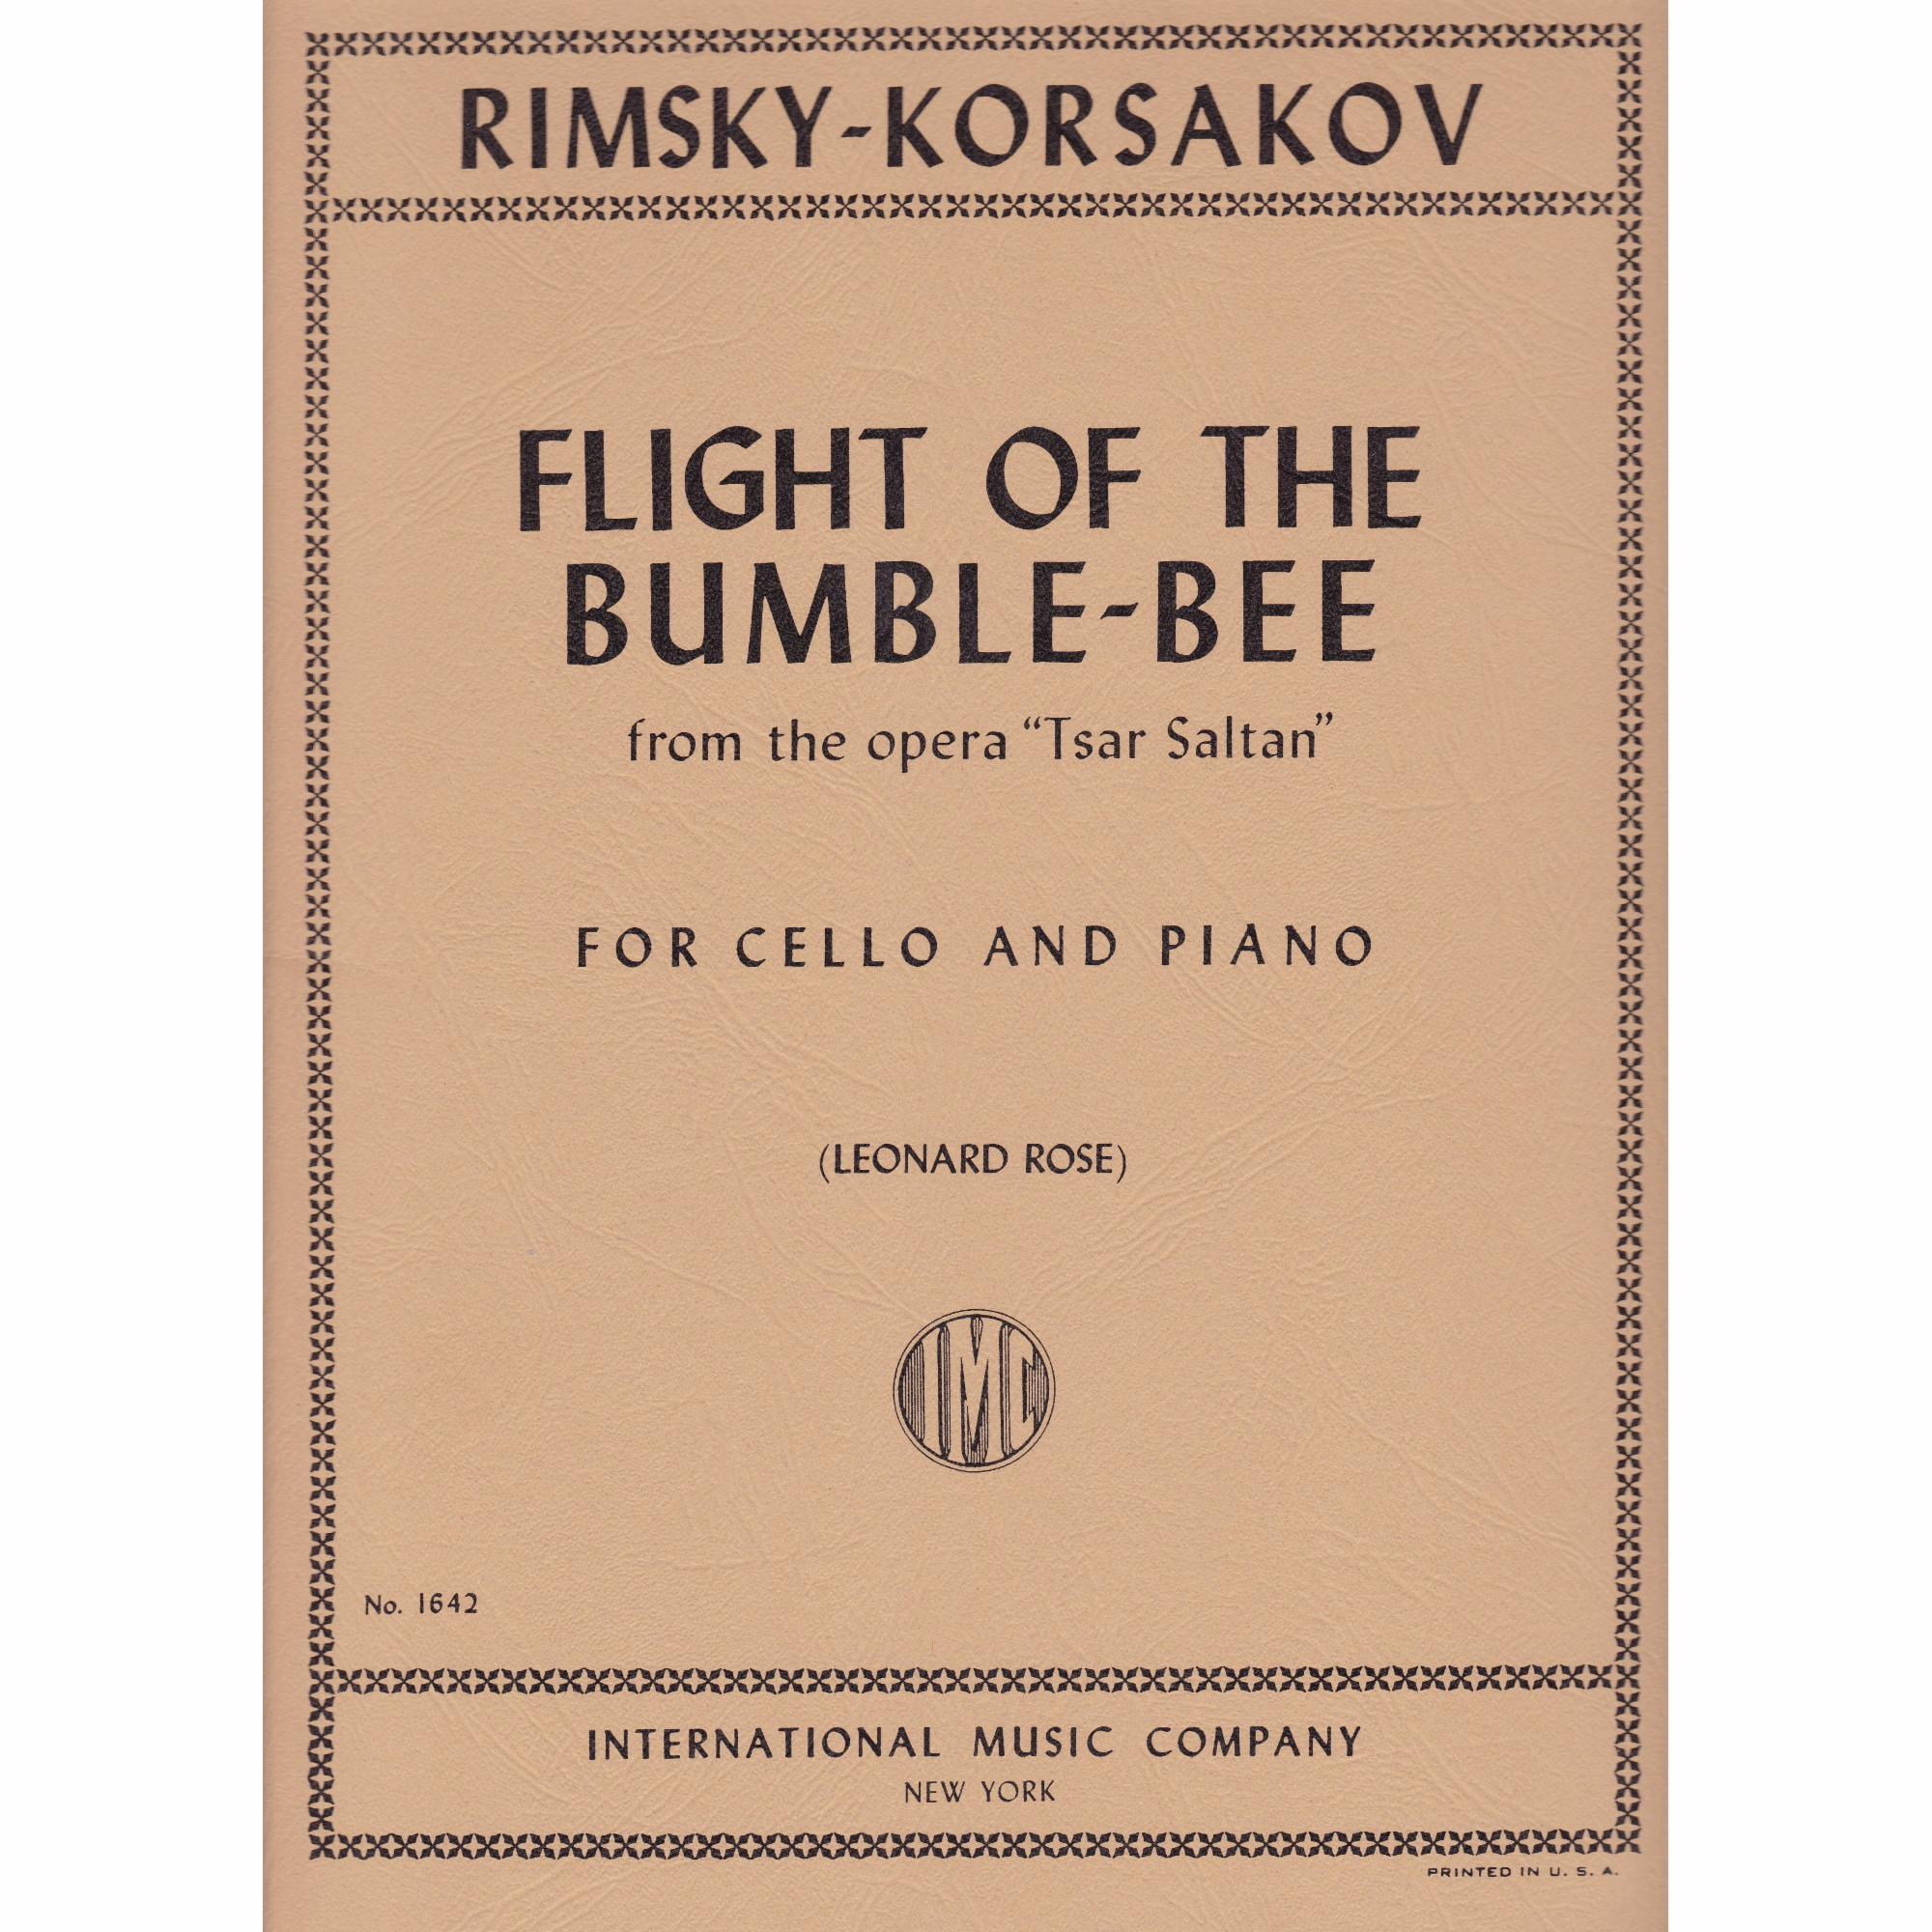 Flight of the Bumble-Bee for Cello and Piano